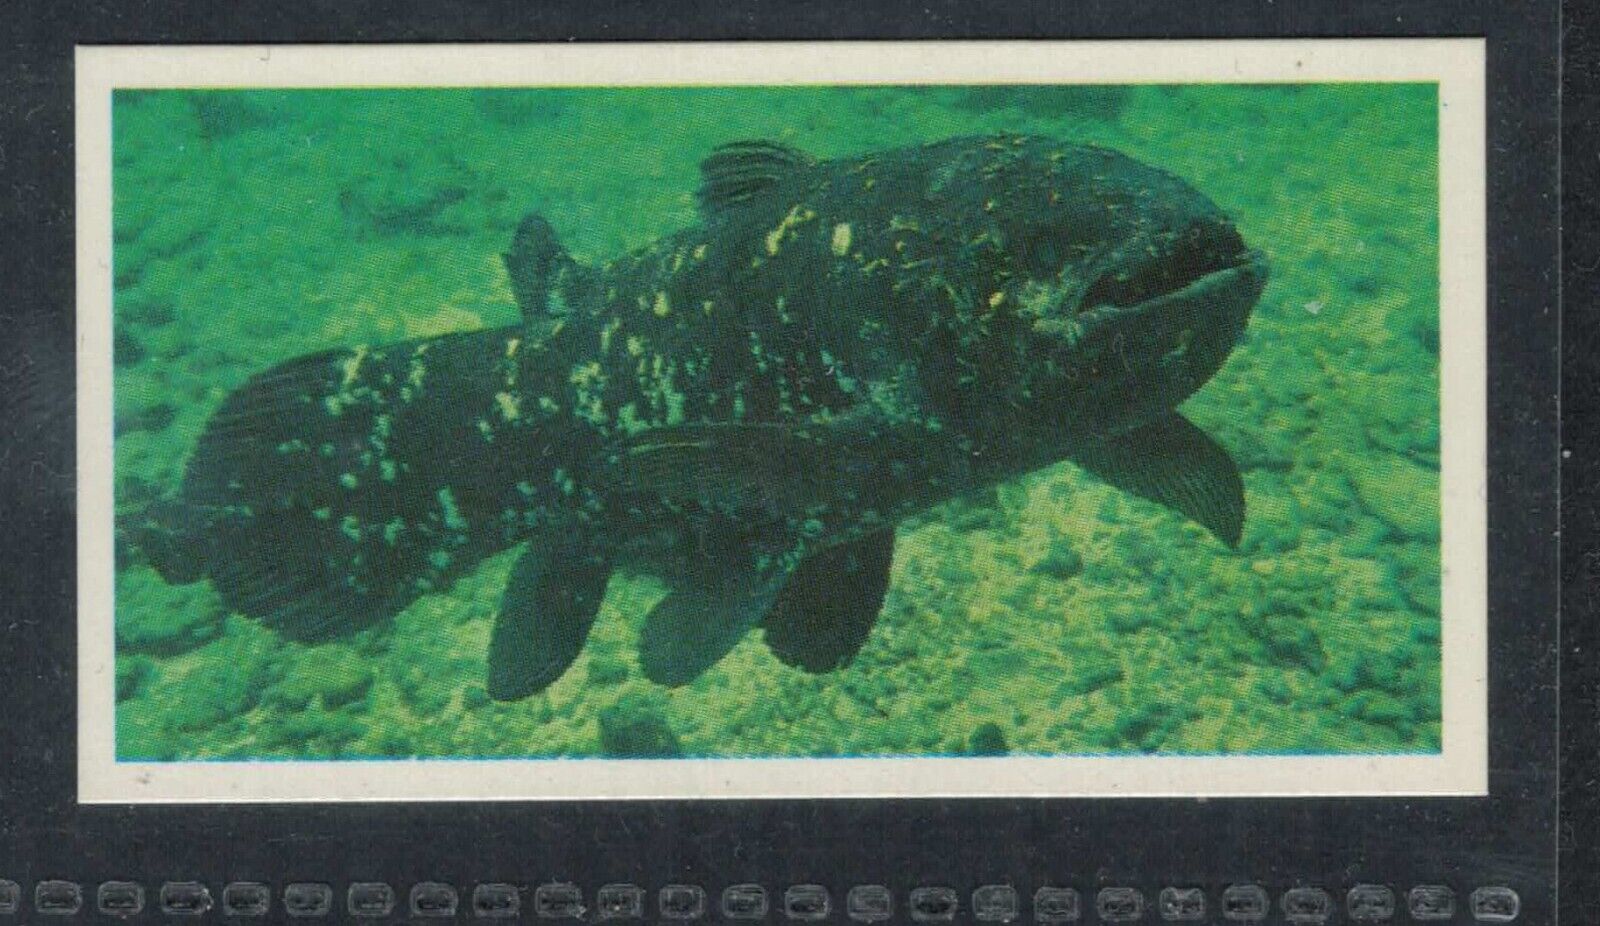 COELACANTH - LIVING FOSSILS - 35 + year old English Trade Card # 28